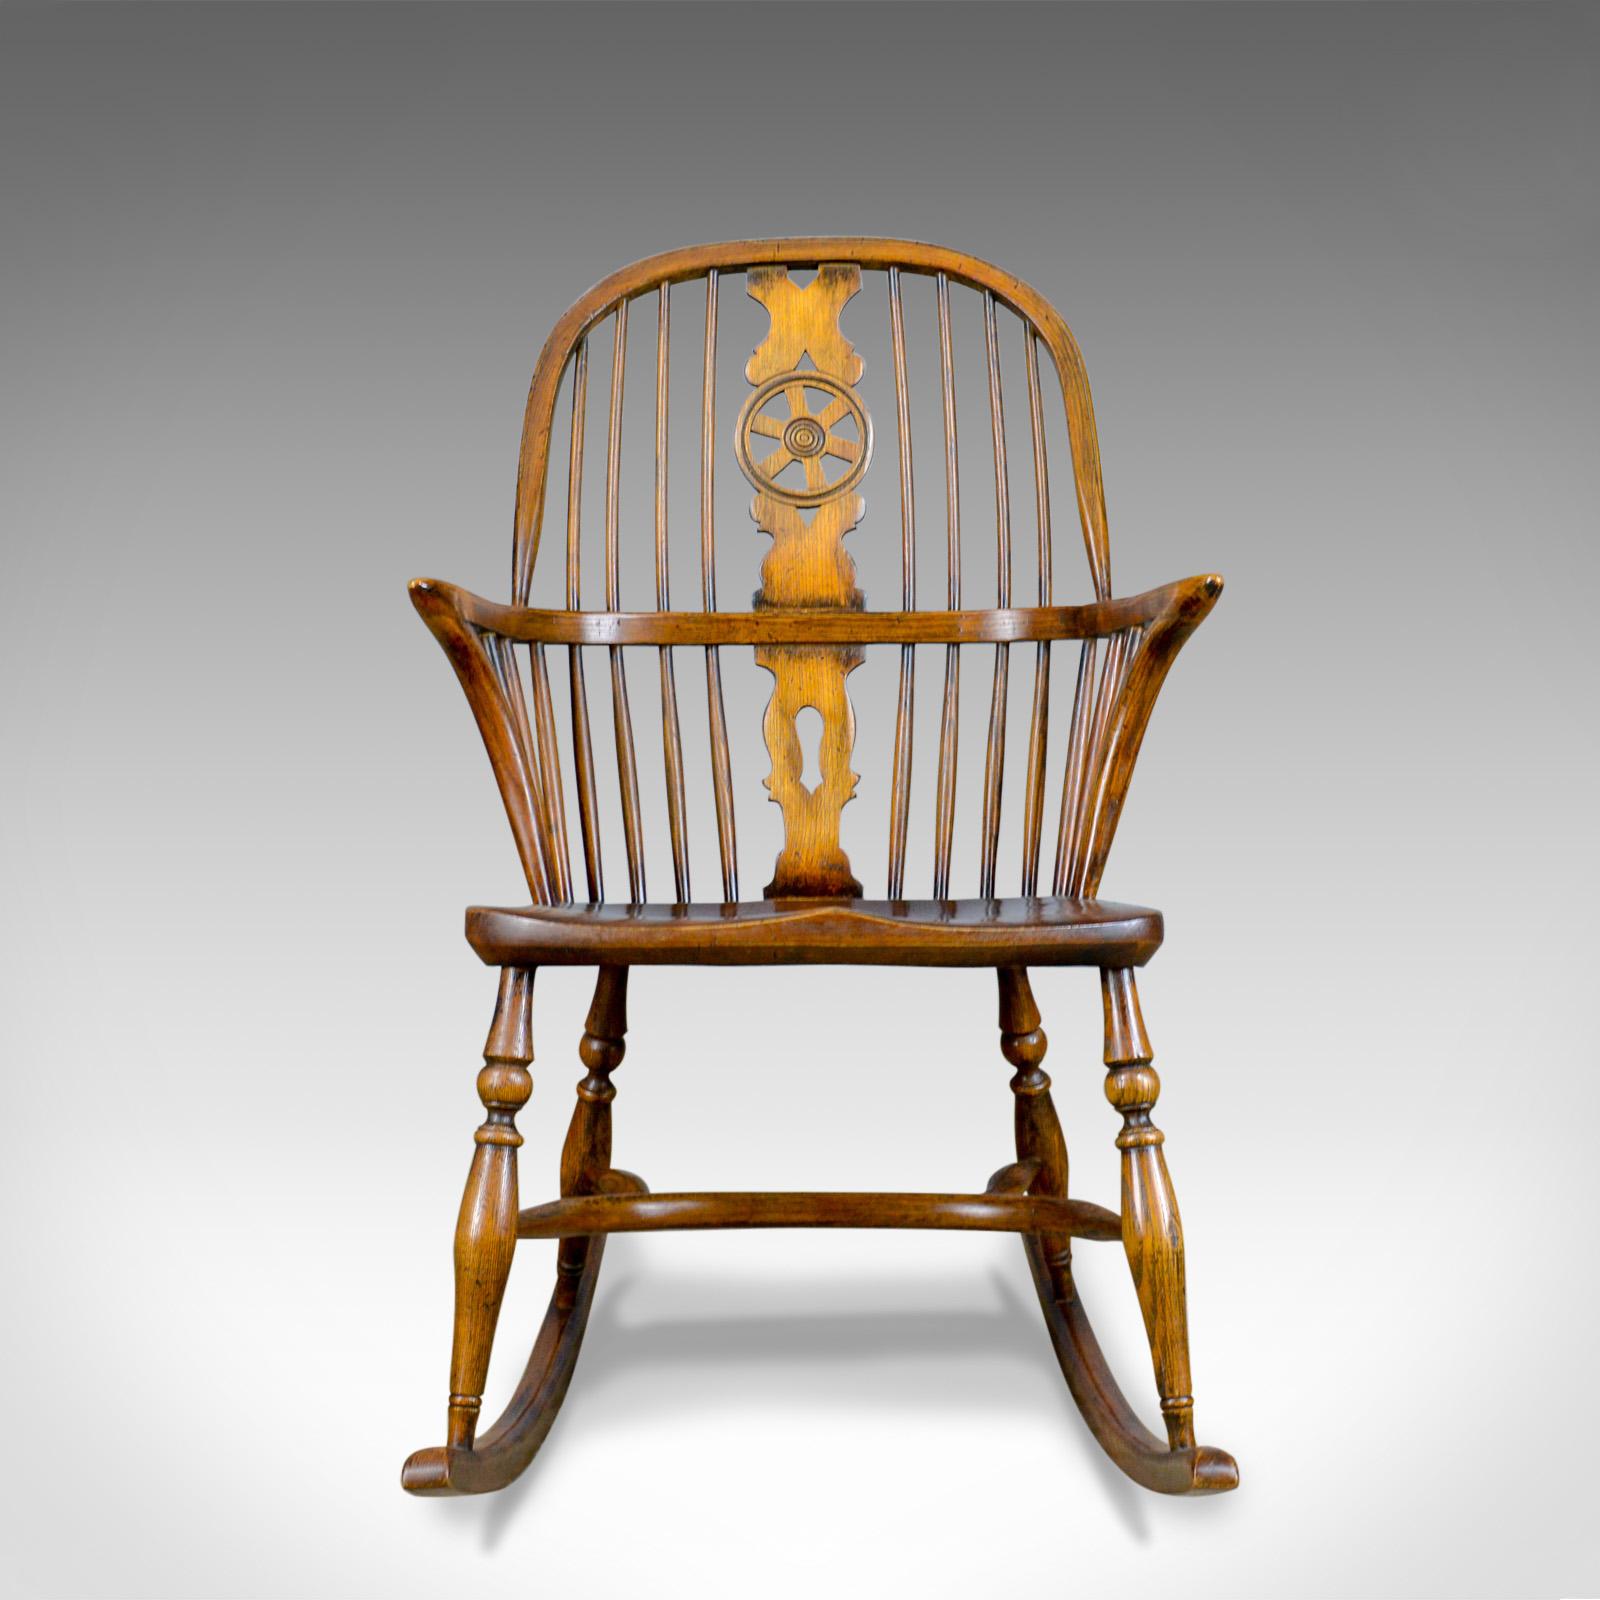 This is an antique rocking chair, an English Edwardian, Windsor, country kitchen, stick back elbow chair in elm, beech and ash dating to circa 1910.

Stunning chair in fine order throughout
Classic pierced back splat above and below the arm